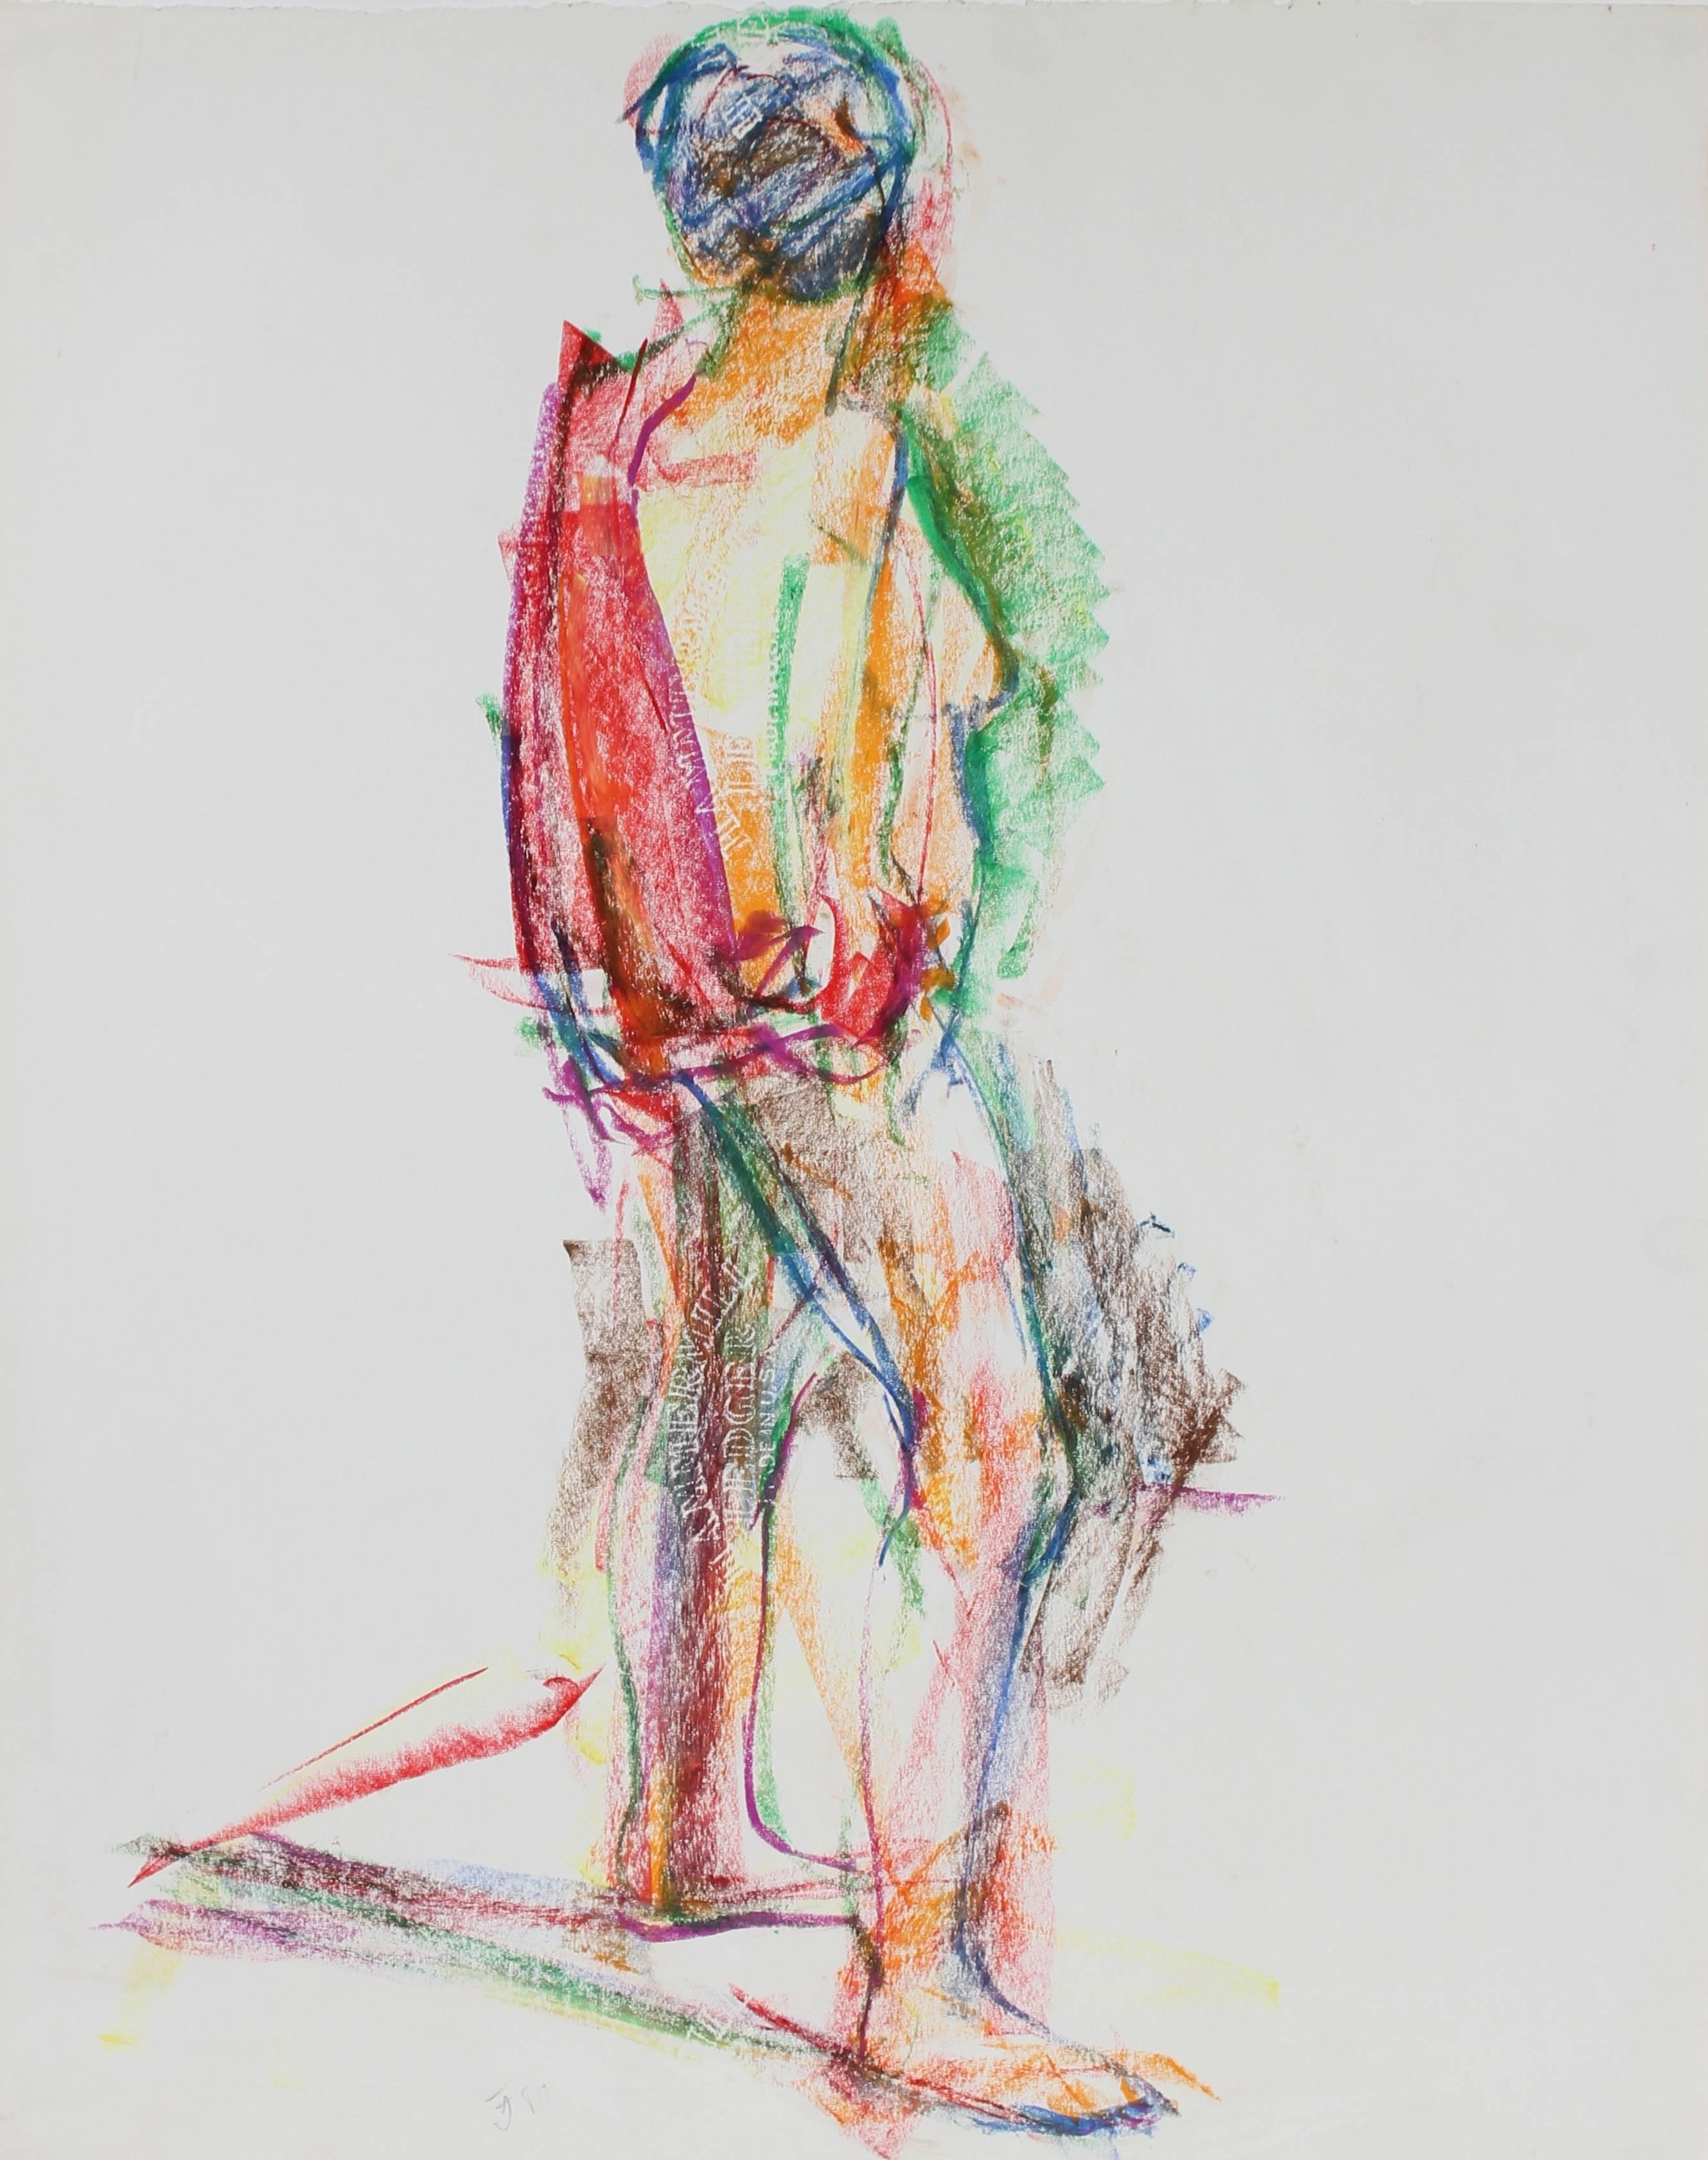 Colorful Expressionist Abstracted Figure in Wax Crayon, 1980